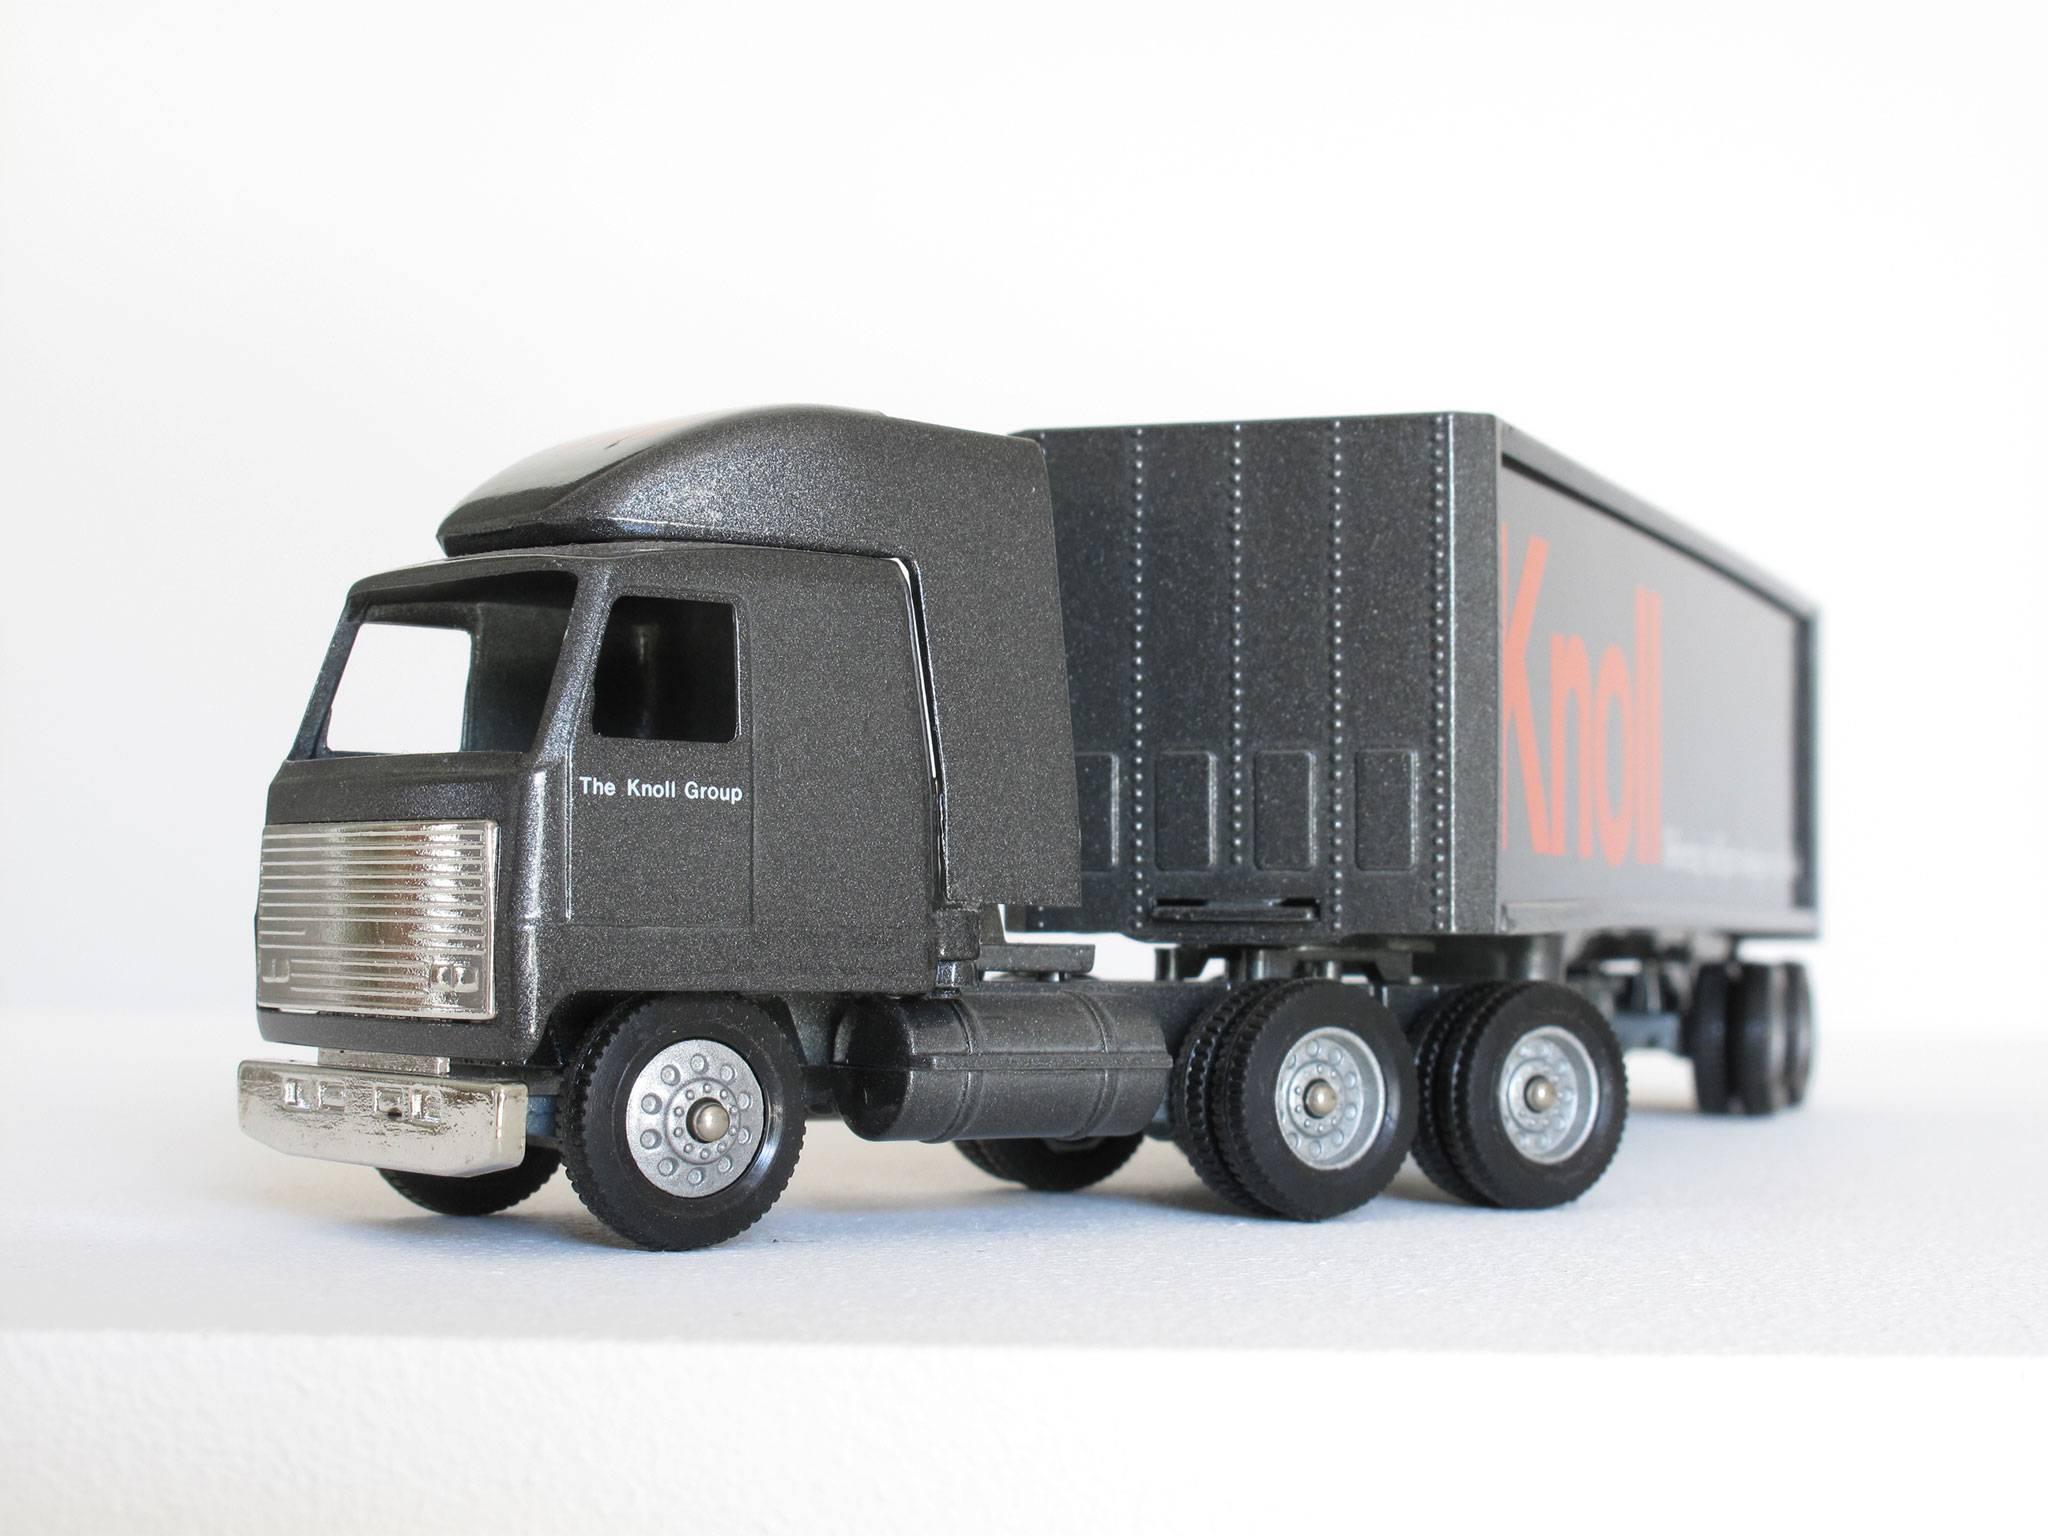 Fun, collectible Knoll Furniture miniature truck advertising, 1:64 scale model, graphite semi-truck with cab and trailer and red logos, made of die cast metal, paint, plastic.
Dimensions: 2 3/8 high x 10 wide x 1 1/2 deep inches.
Condition: Good